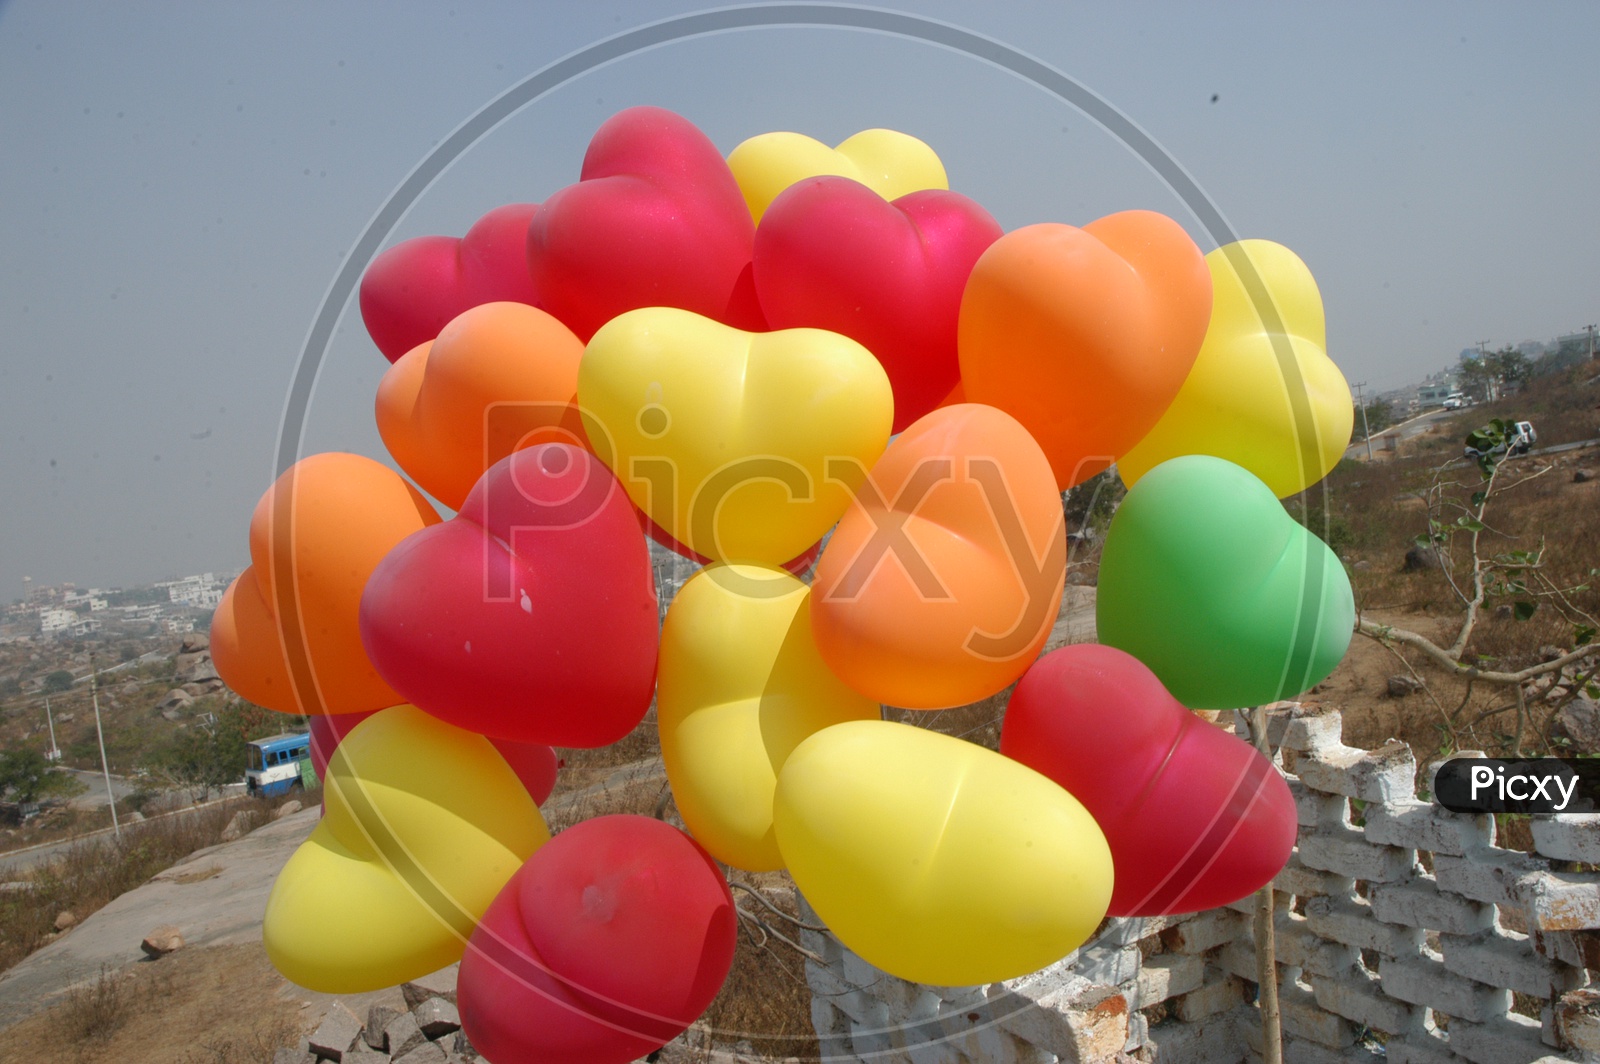 Colorful heart shaped balloons